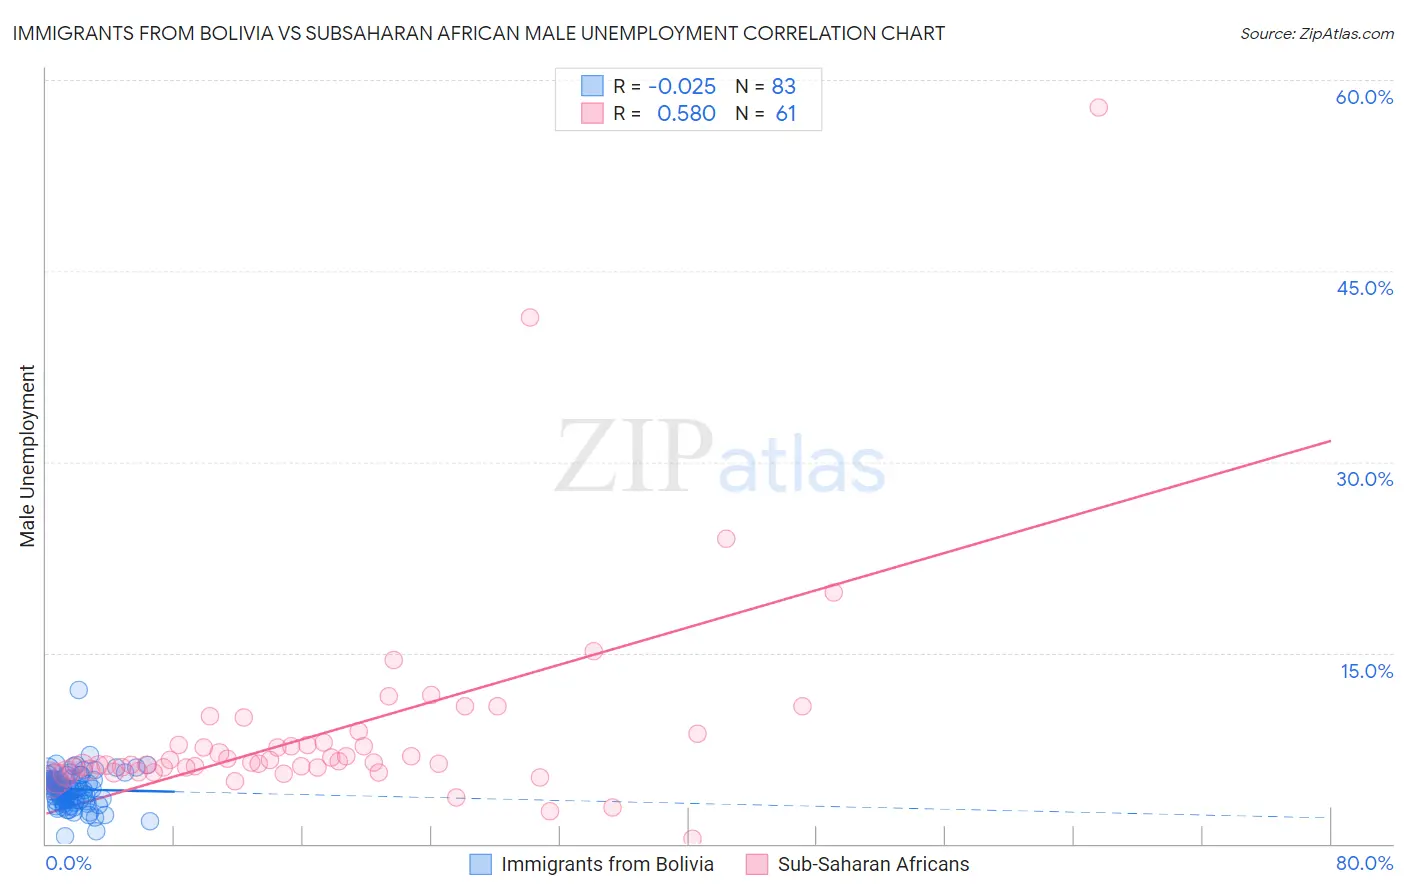 Immigrants from Bolivia vs Subsaharan African Male Unemployment